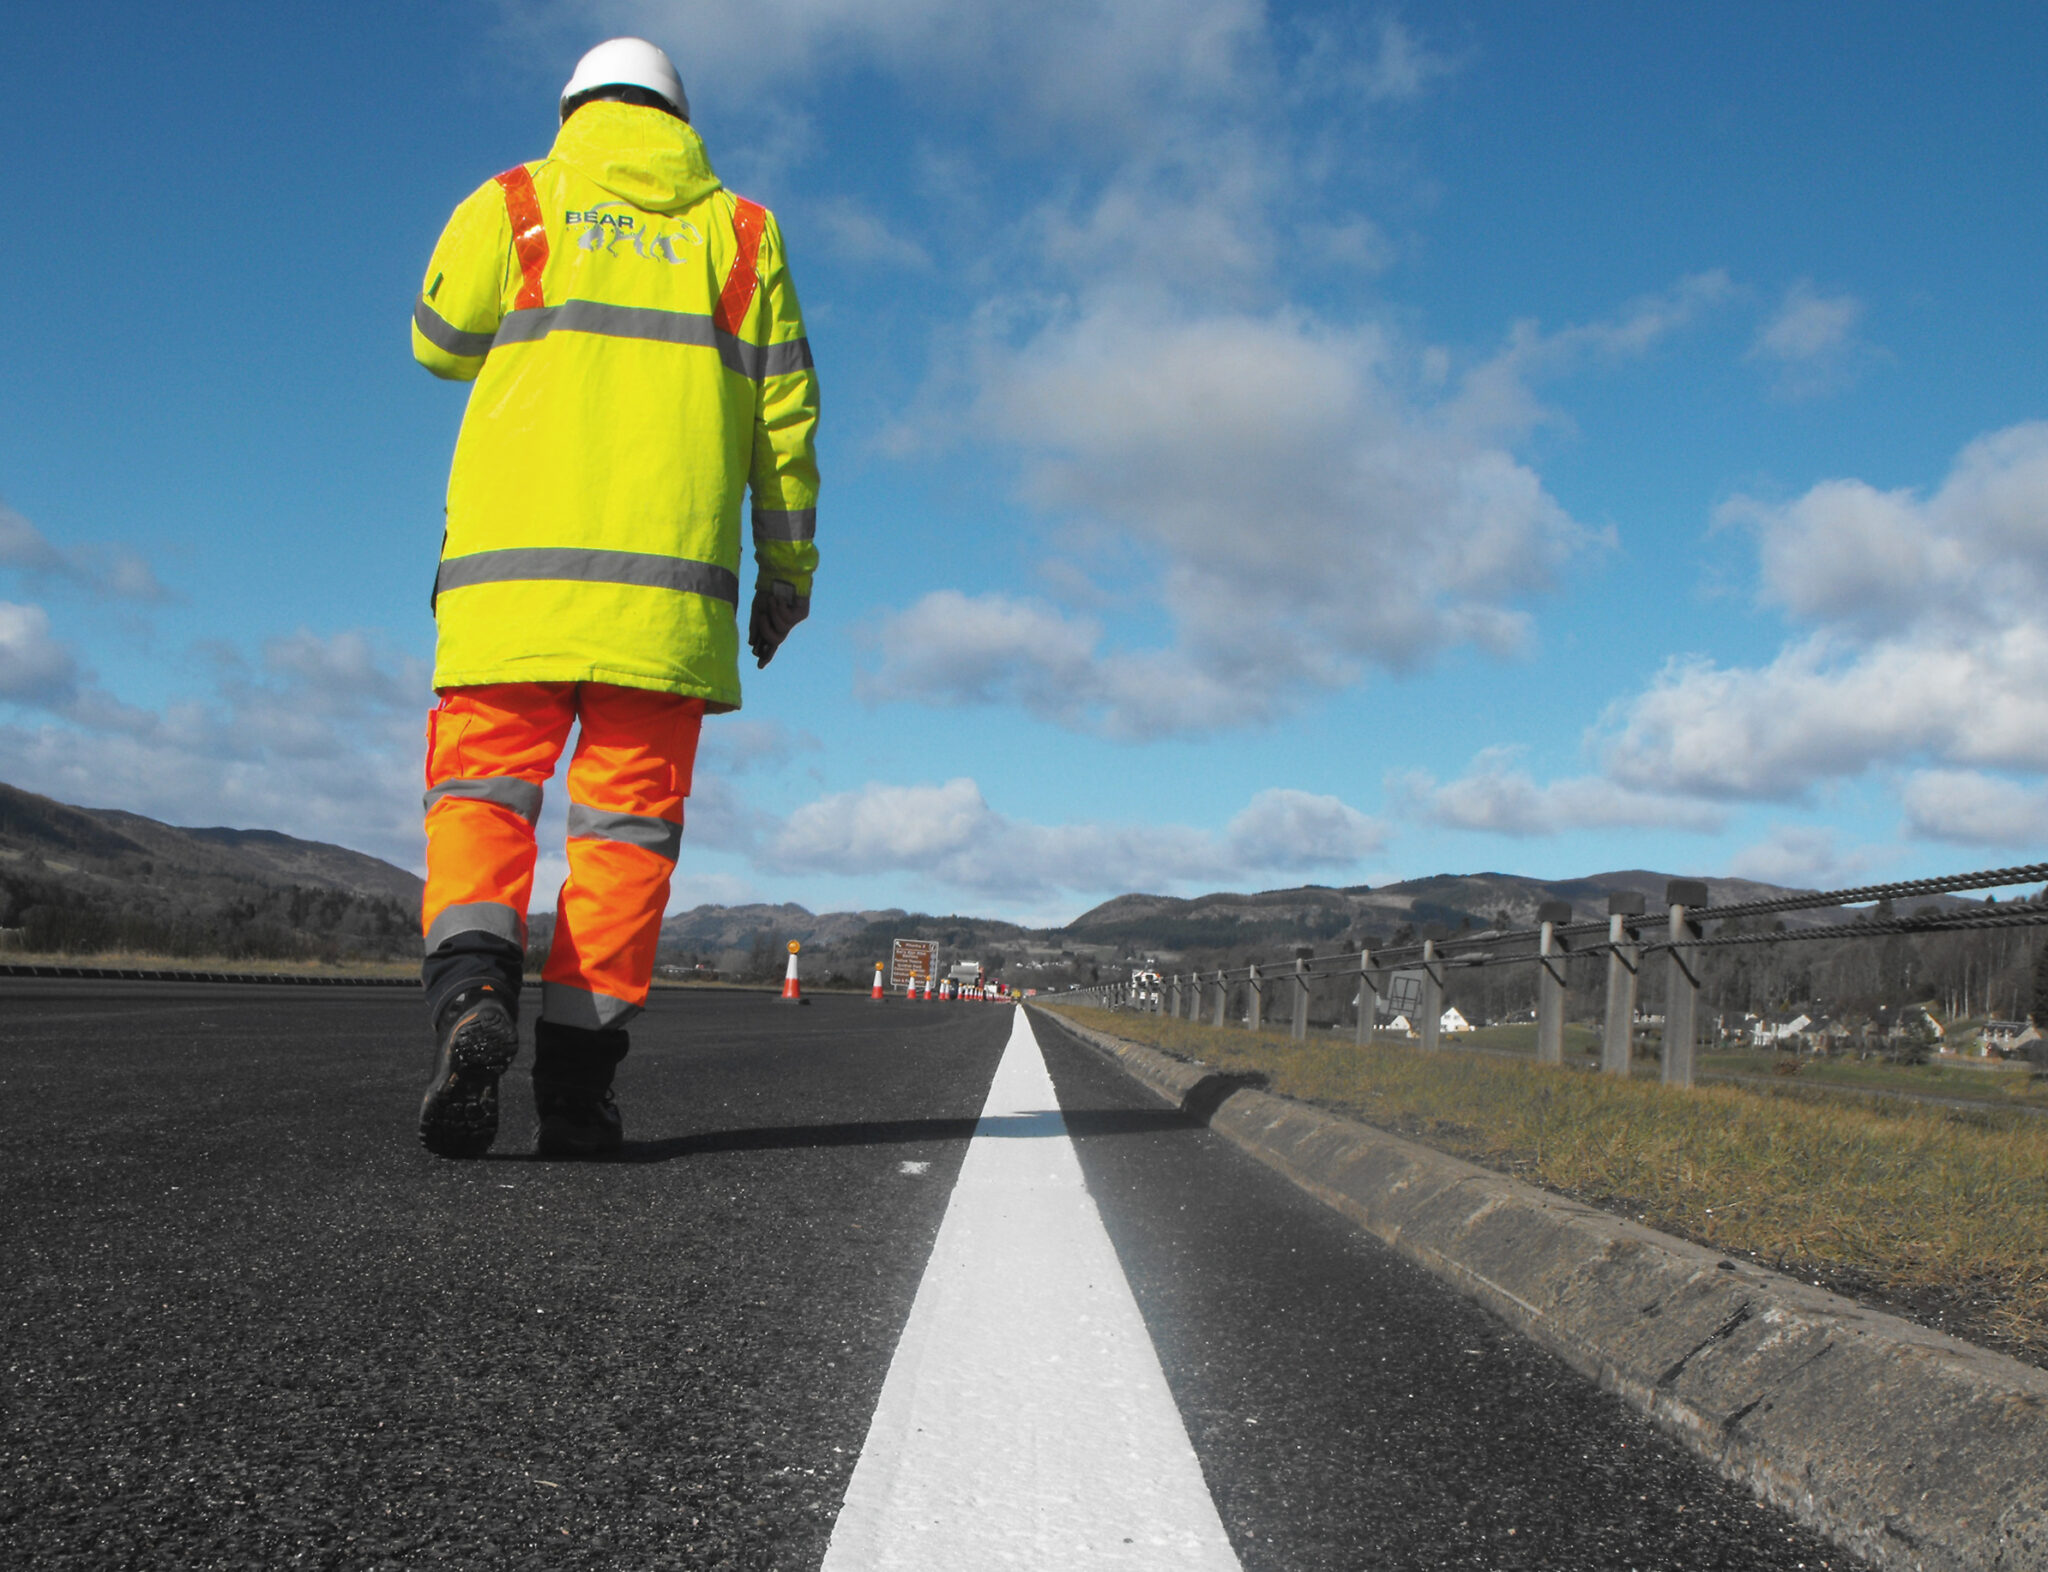 £380,000 SURFACING IMPROVEMENTS PLANNED FOR A9 BETWEEN CRIEFF ROAD AND INVERALMOND ROUNDABOUT